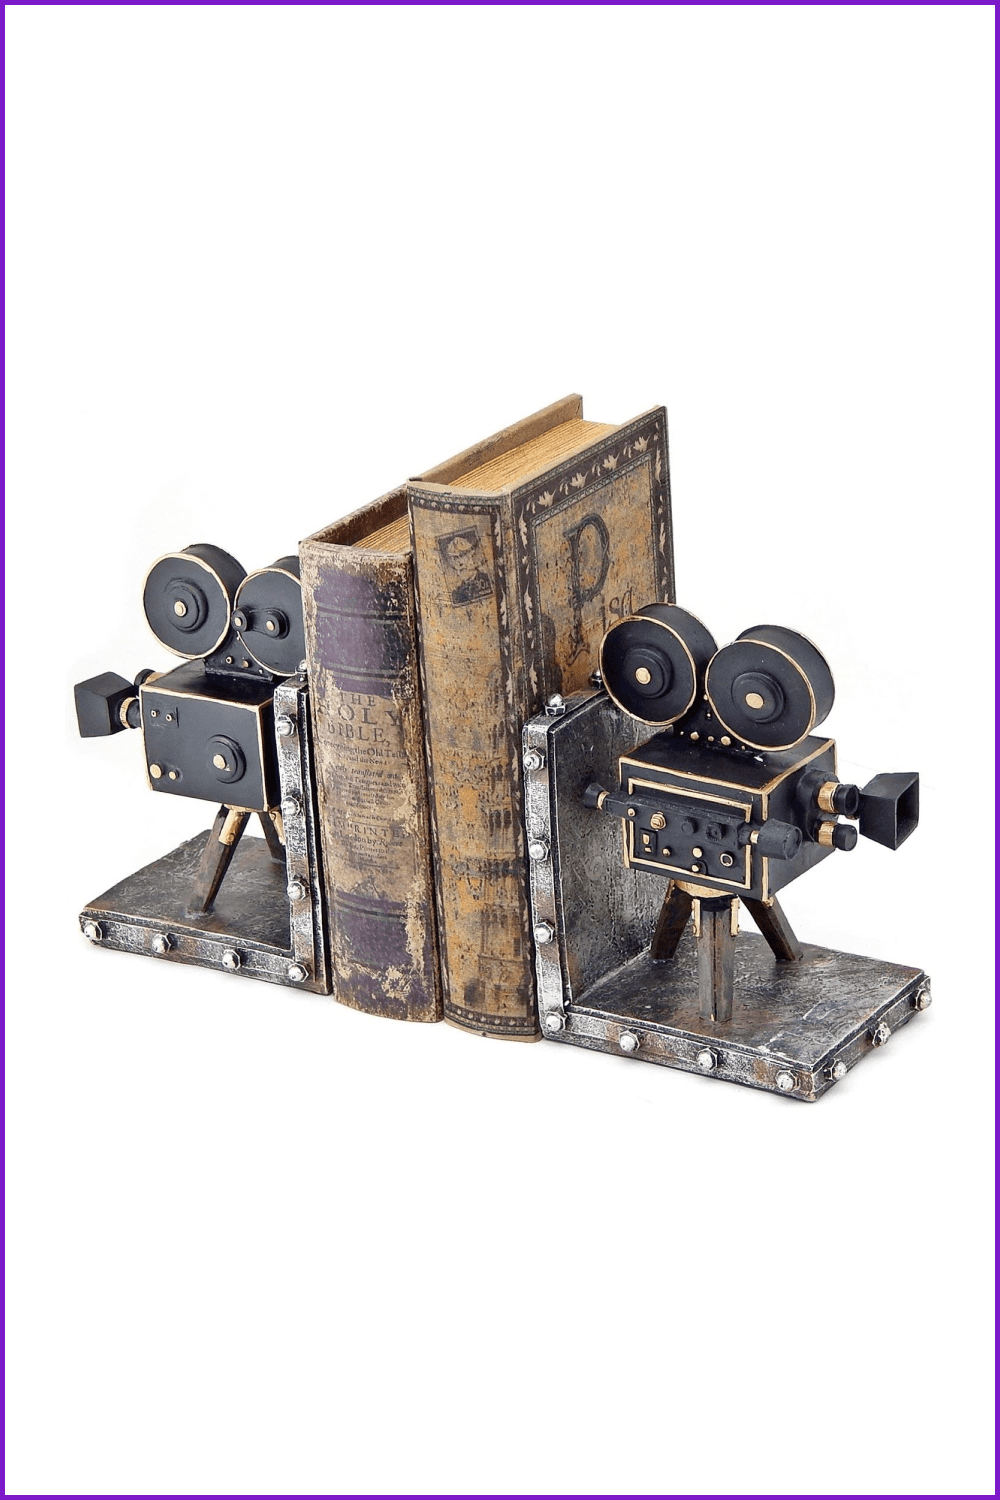 Book stands in the form of ancient film projectors.